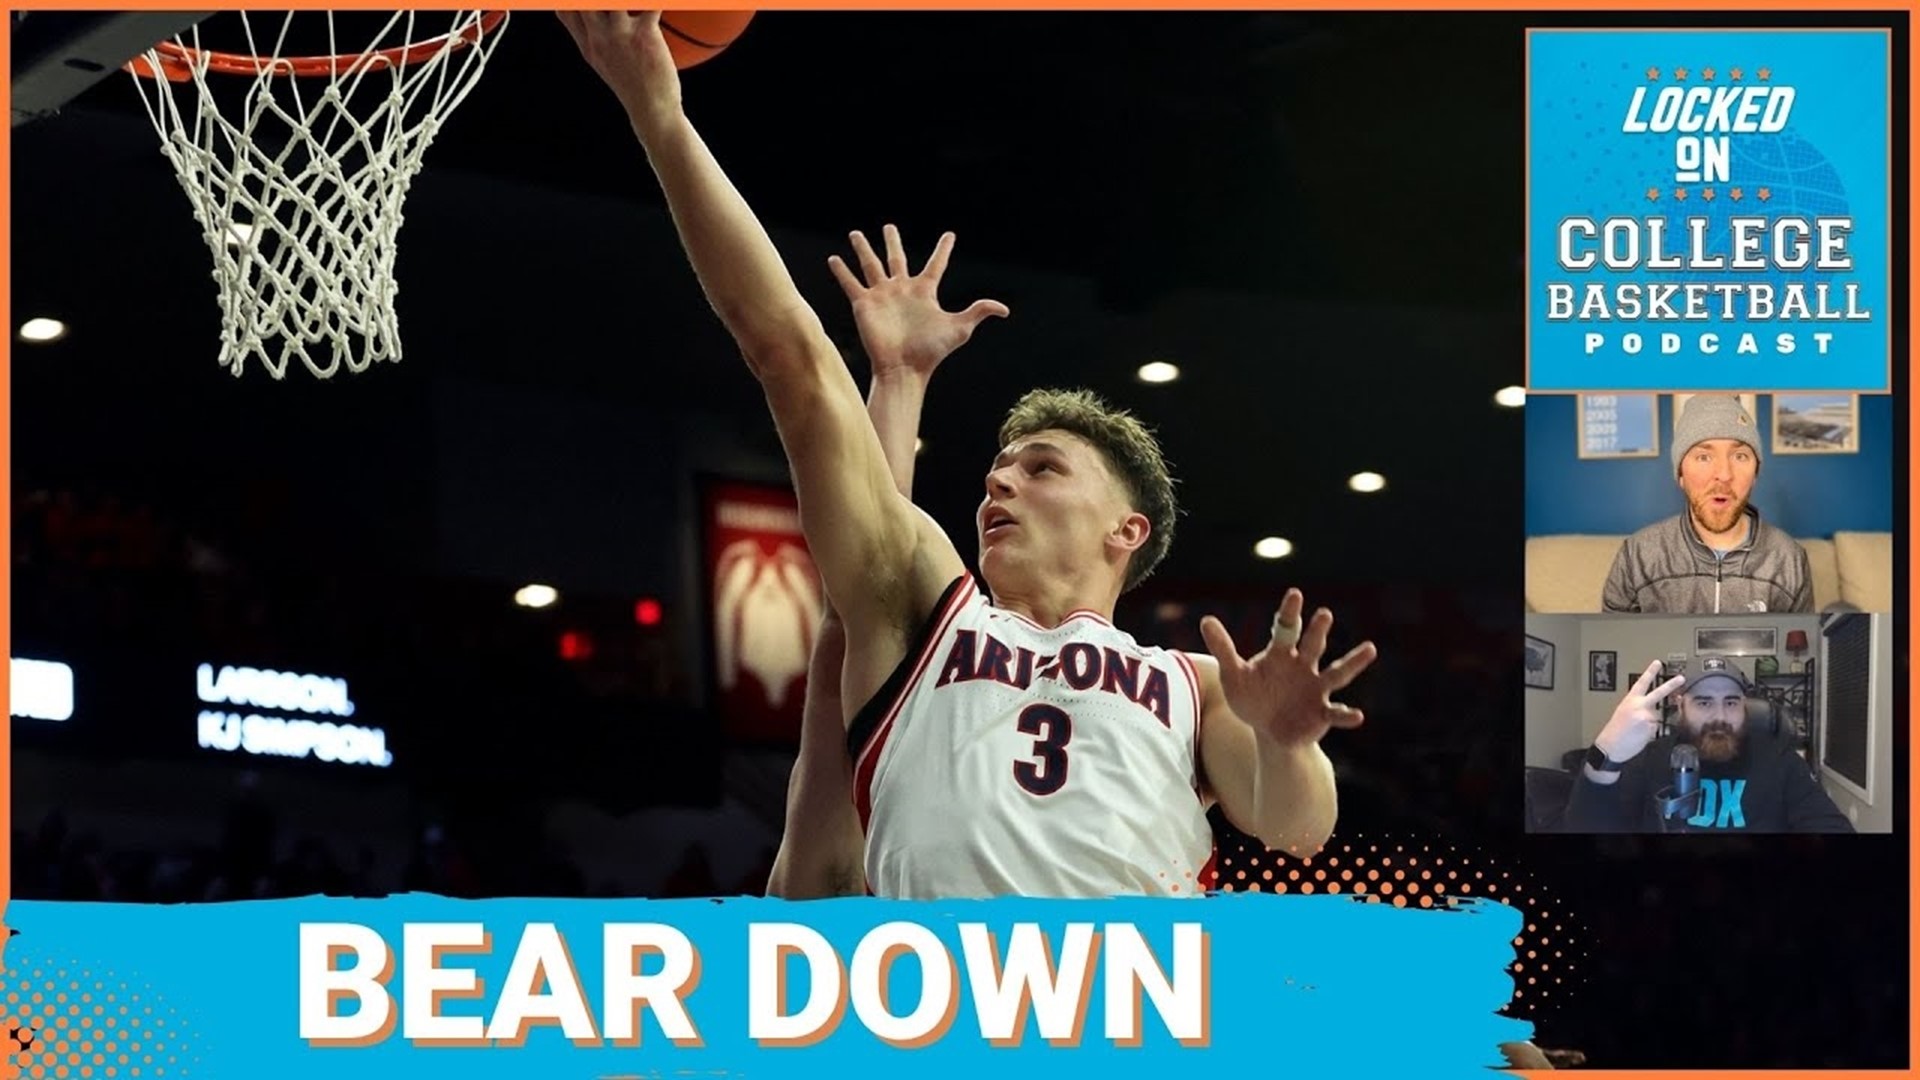 The Arizona Wildcats obliterated the Colorado Buffaloes on Thursday, winning 97-50 in an incredible display of offensive and defensive efficiency.